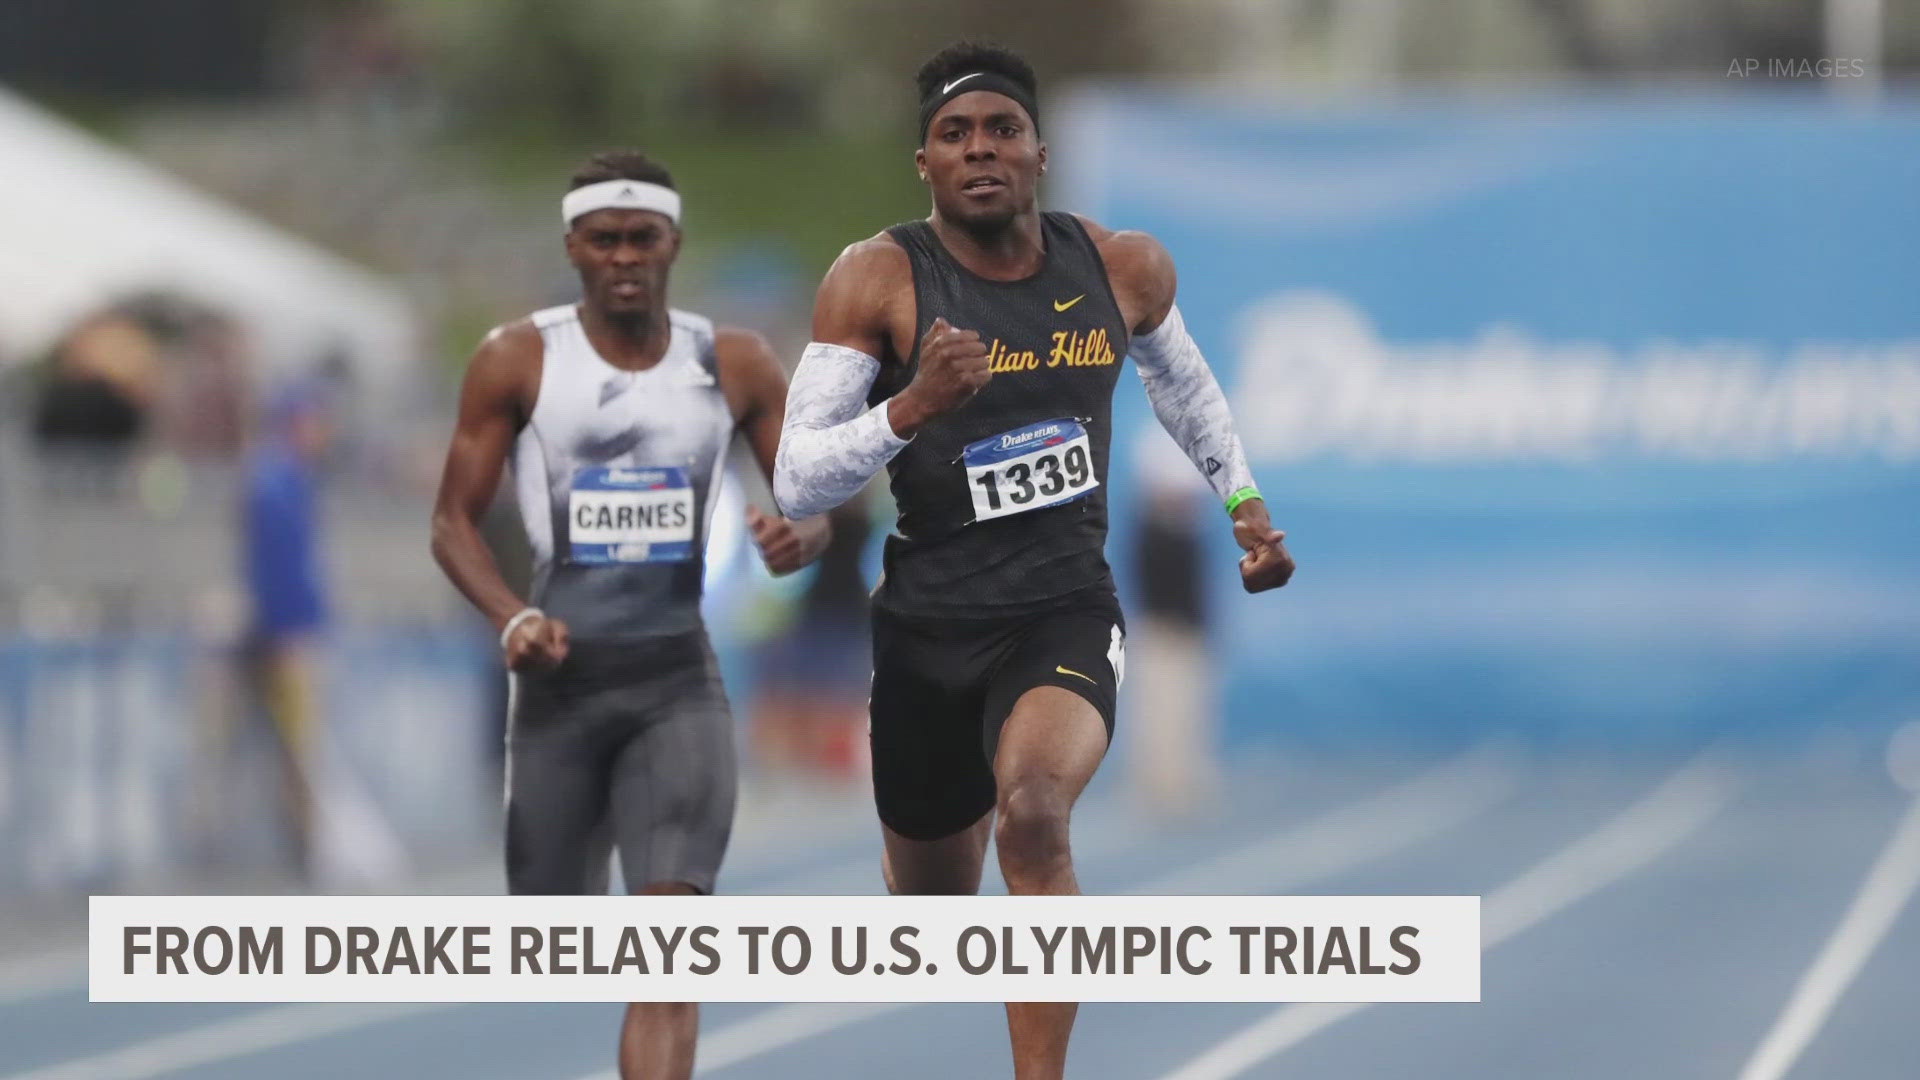 Sixteen of the athletes who have qualified for the Olympics are Drake Relays alumni.